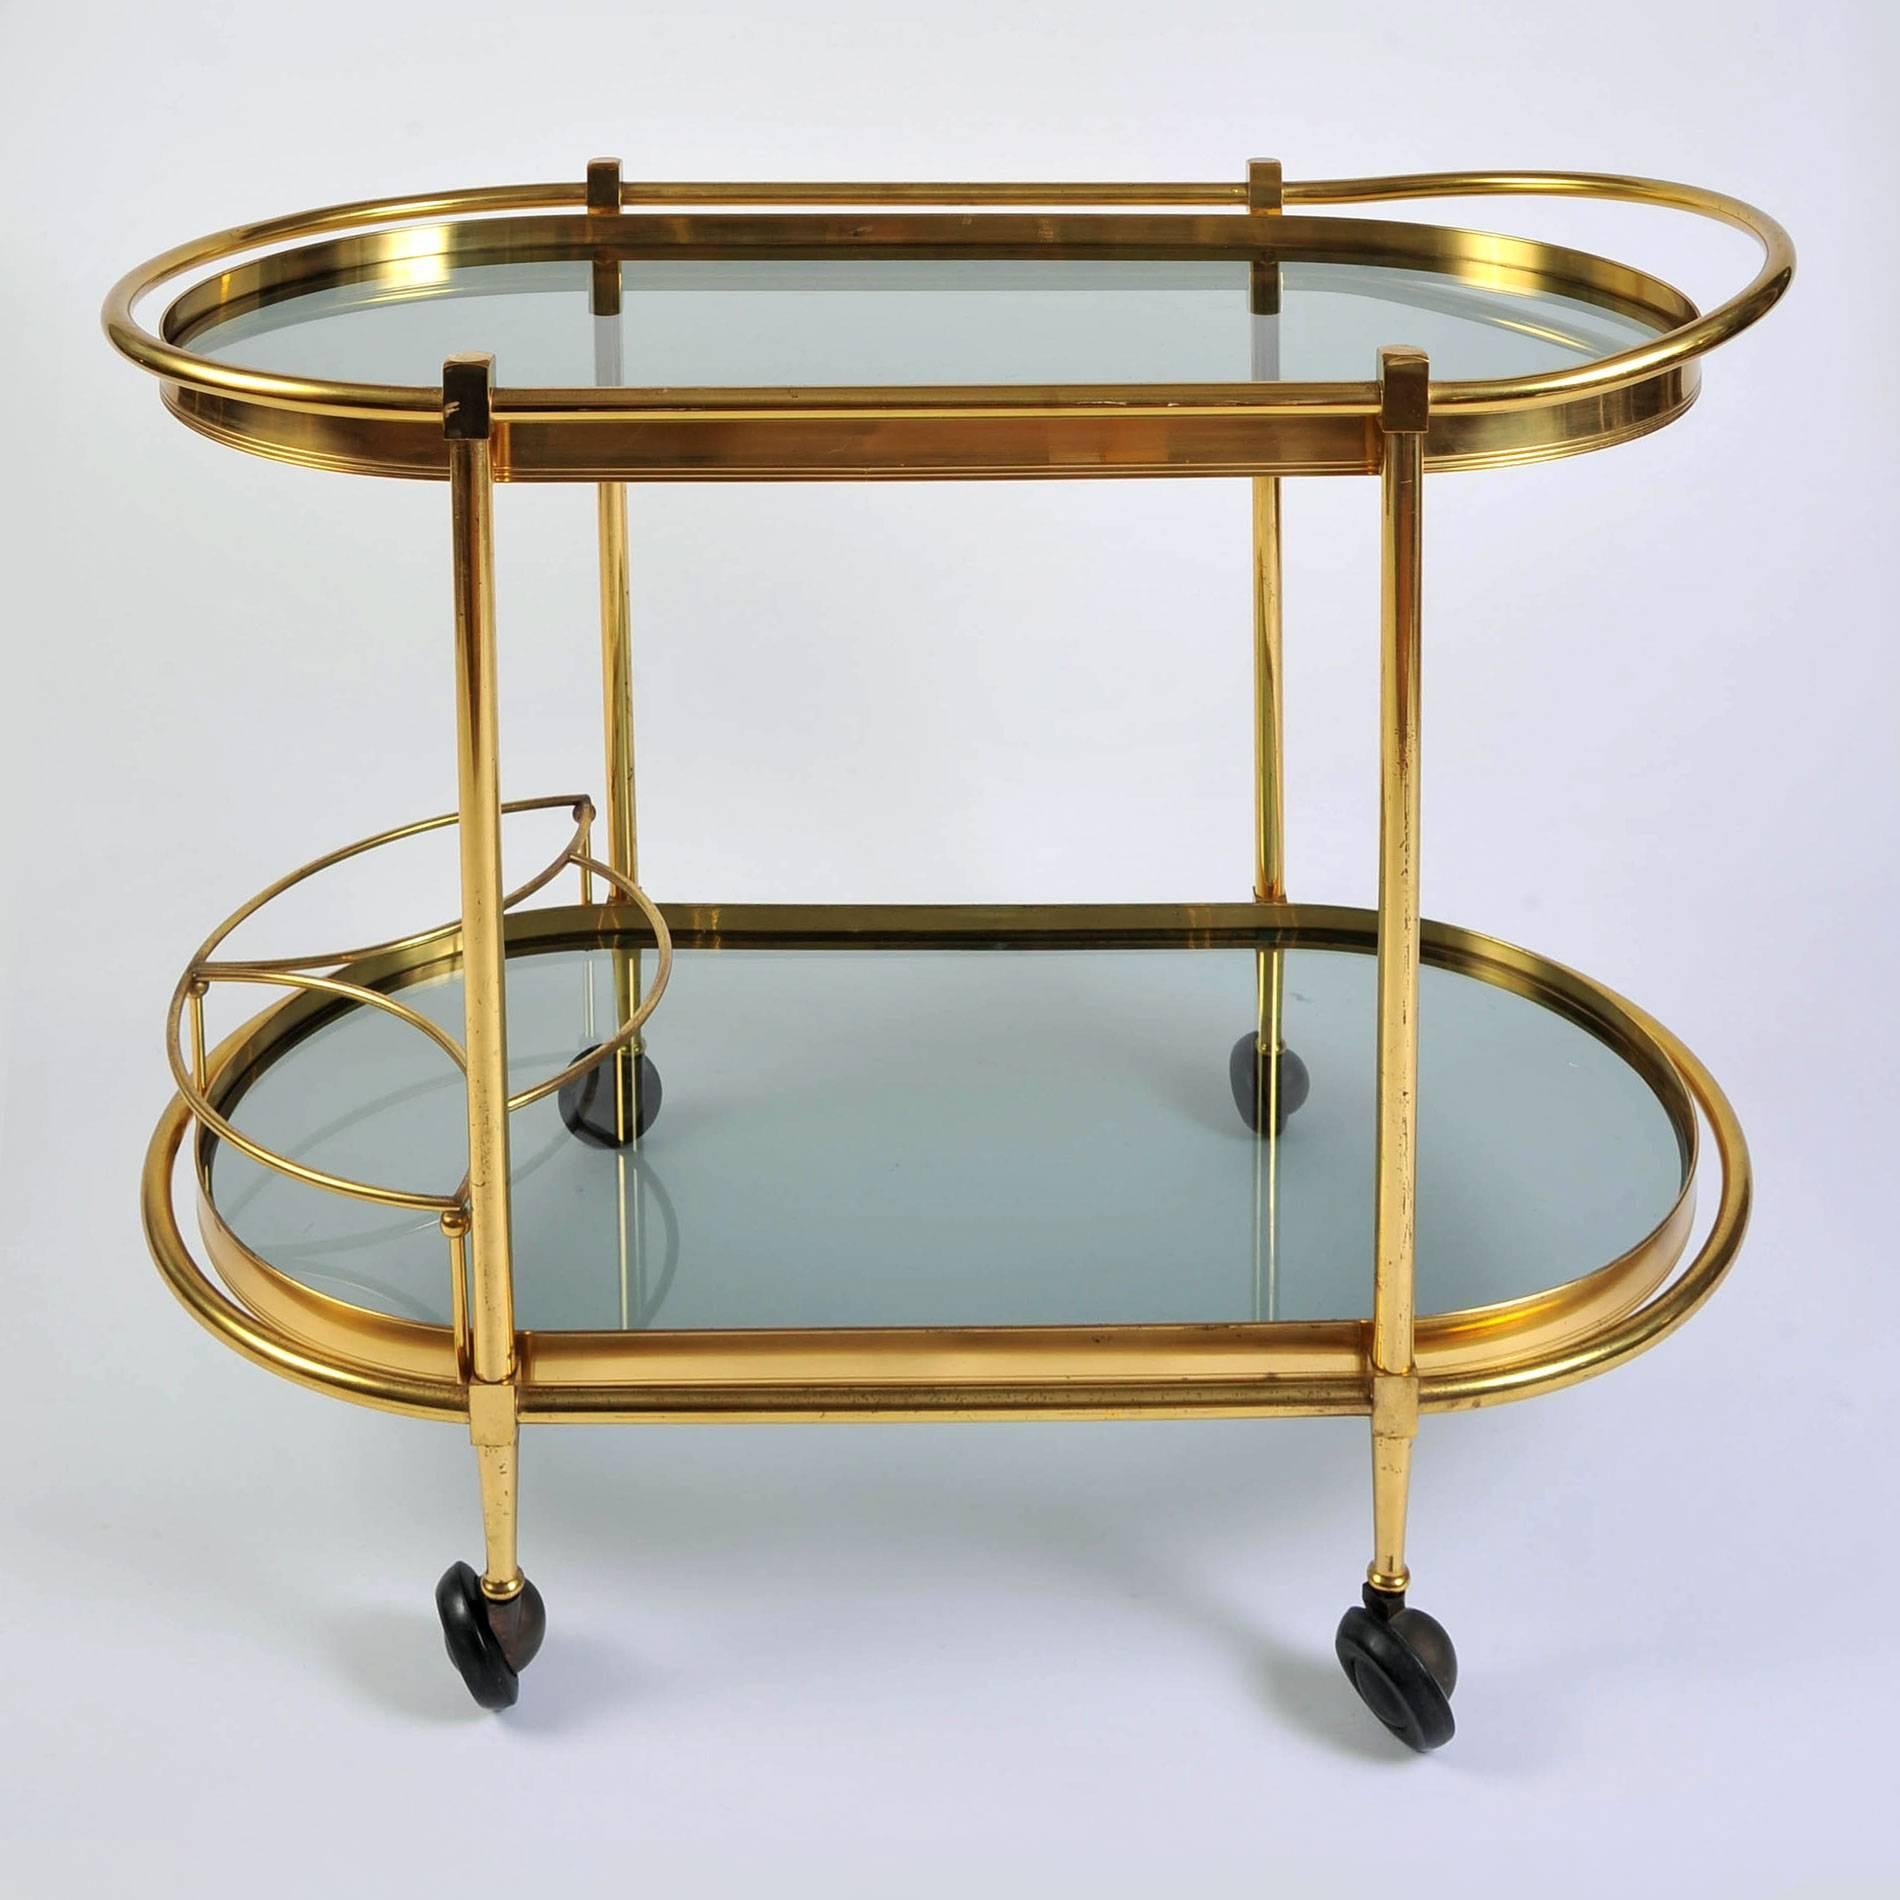 Curved bar cart/drinks trolley with two smokey glass shelves and bottle holder on wheels. Both shelves are surrounded by simple brass frames extending on the top shelf to create a handle.